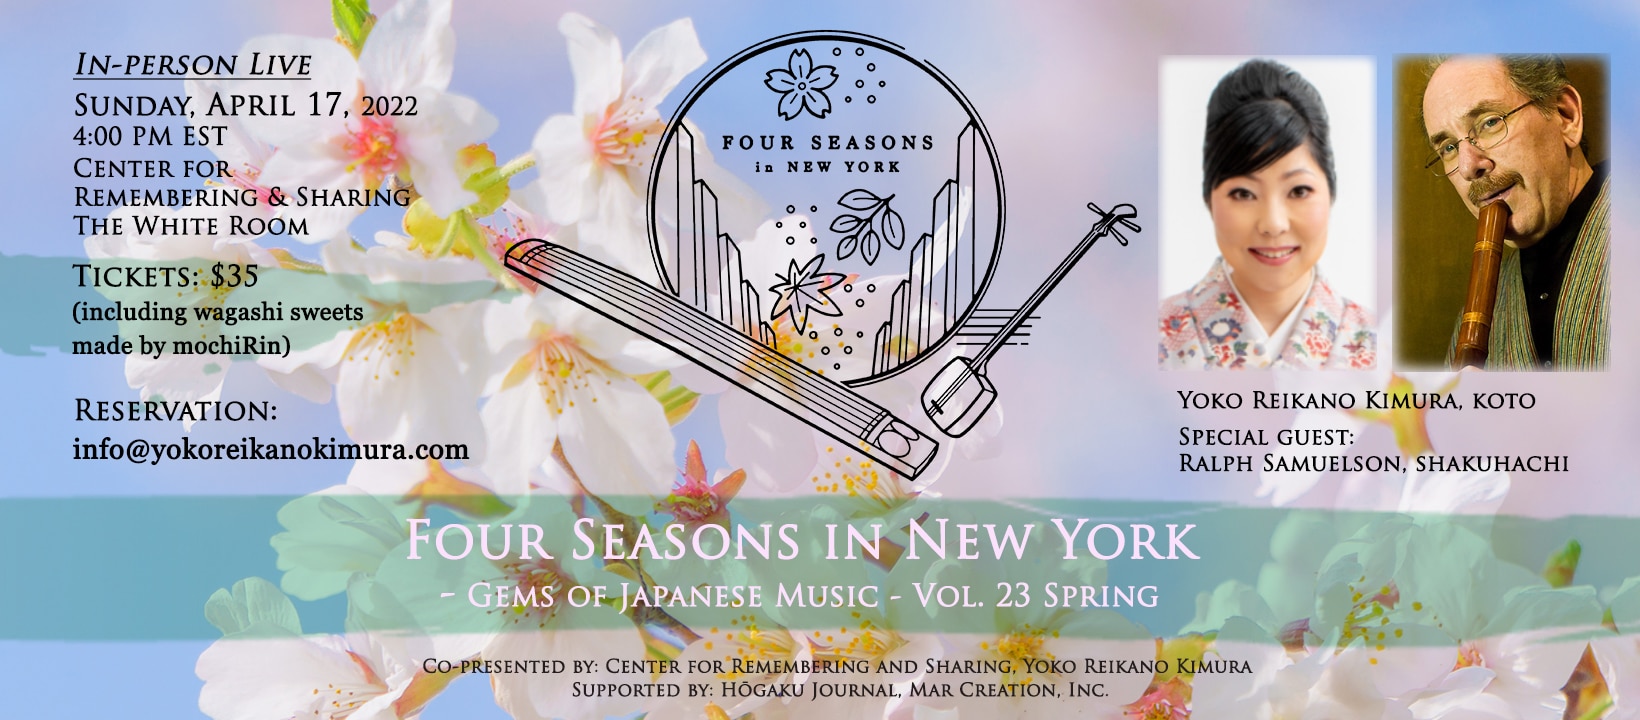 Four Seasons in NY: Gems of Japanese Music vol. 23